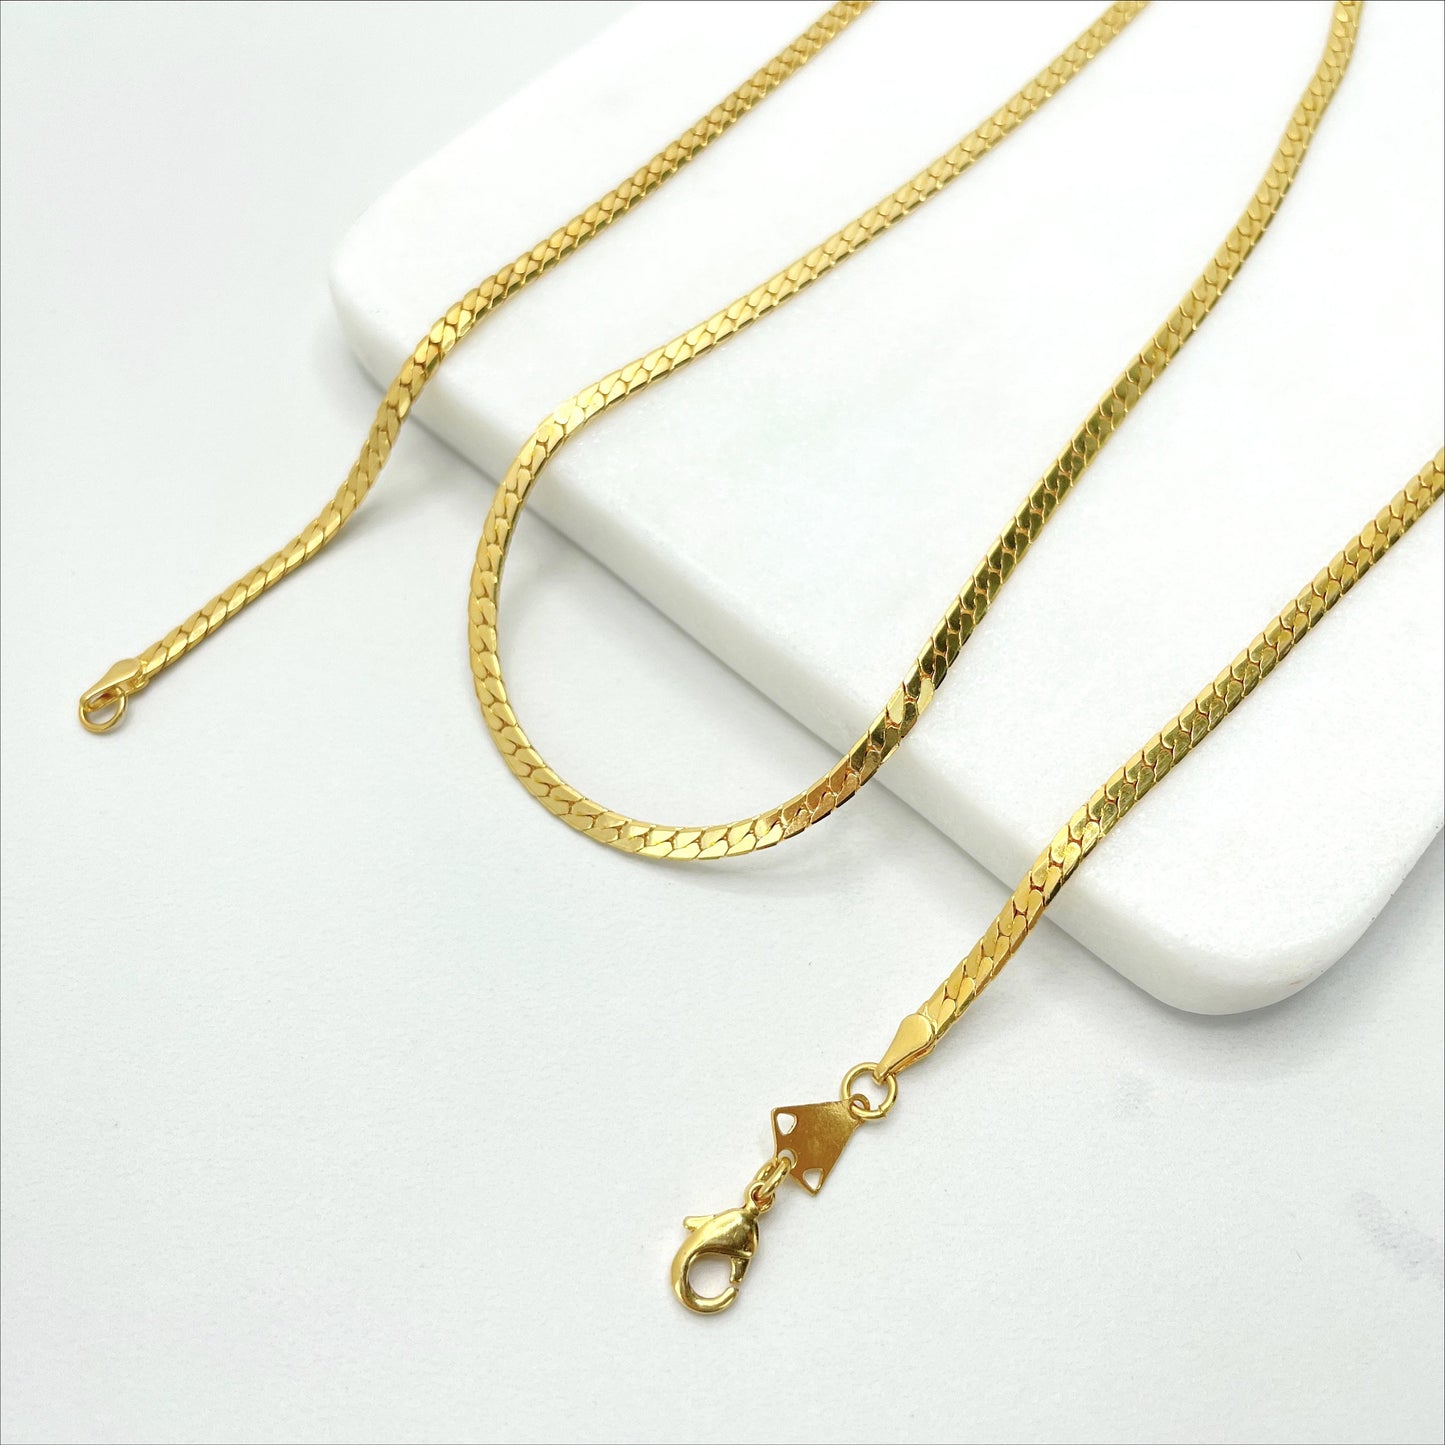 18k Gold Filled 3mm Snake Herringbone Chain, 20 Inches, Lobster Claw, Wholesale Jewelry Making Supplies